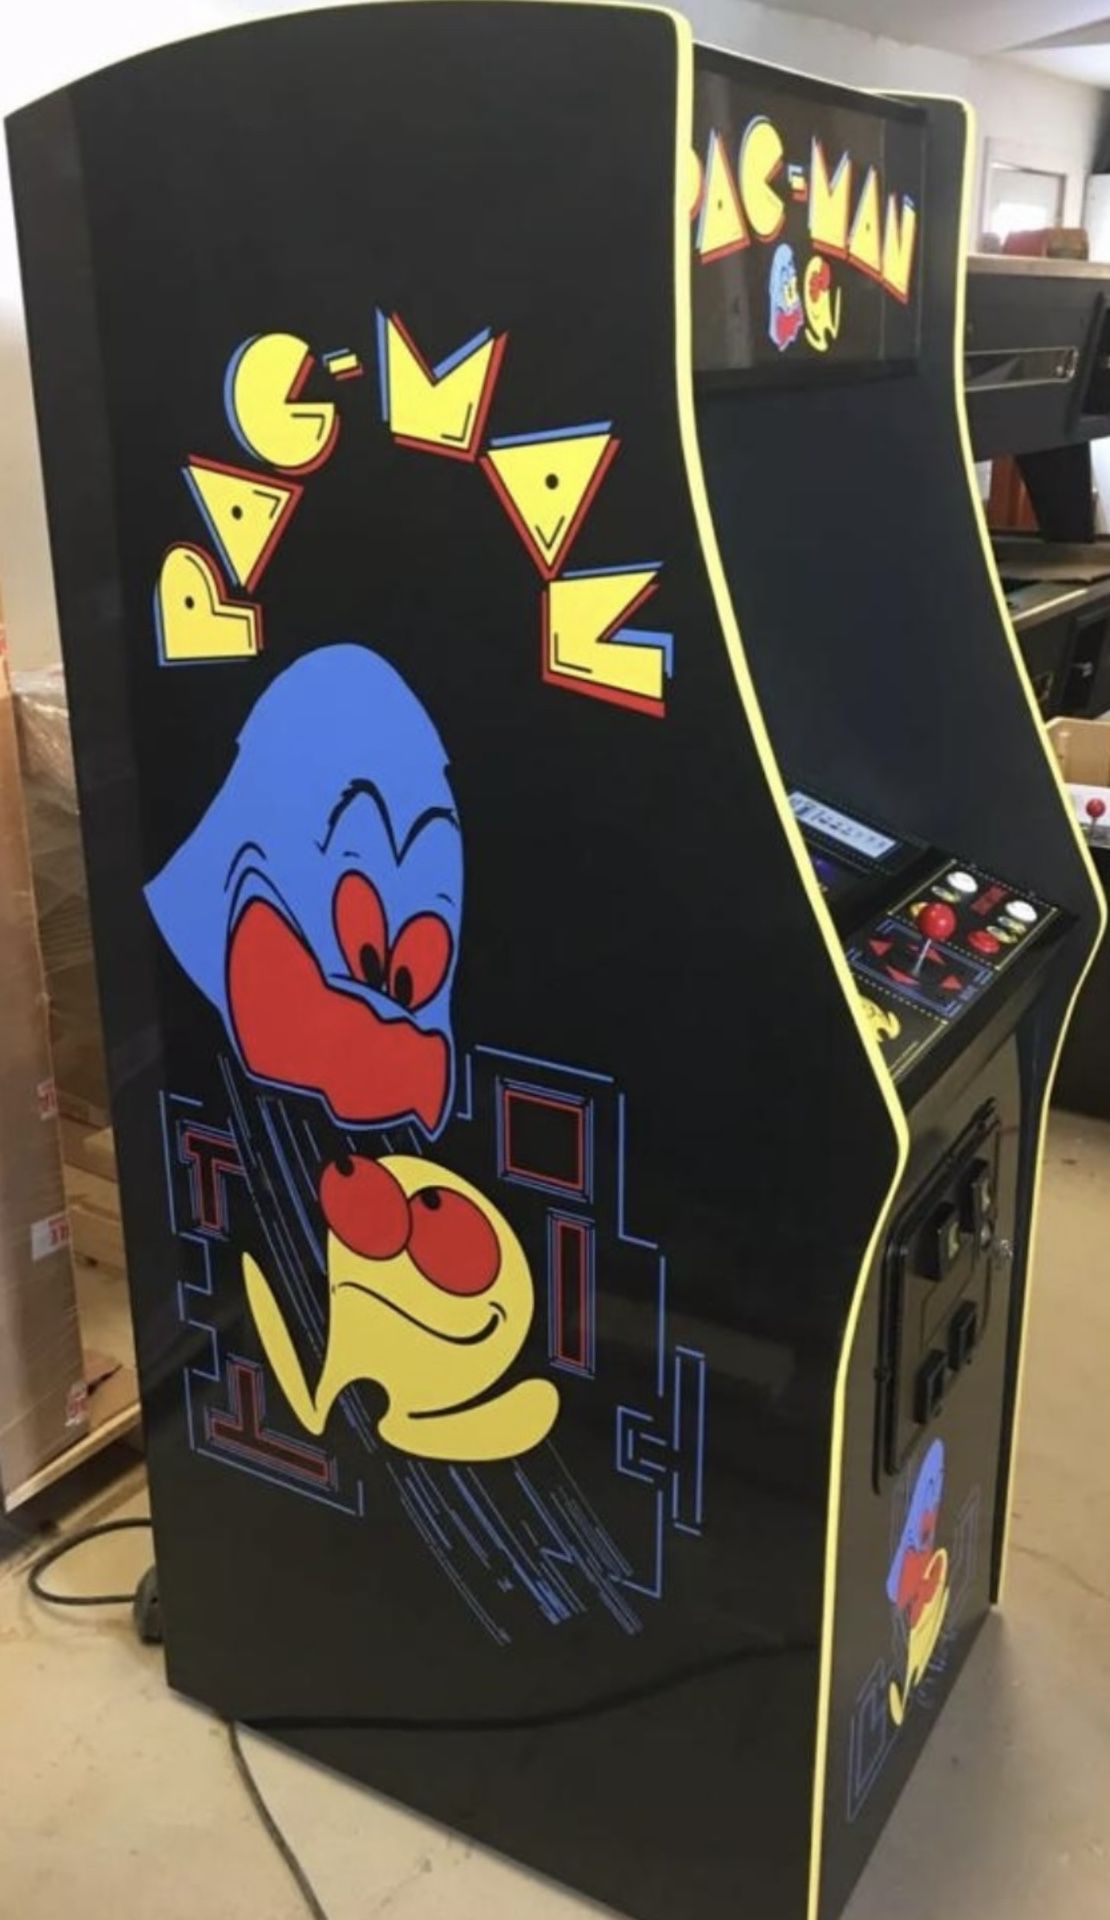 PAC-Man Iconic full size arcade machine-Includes 400 games! 